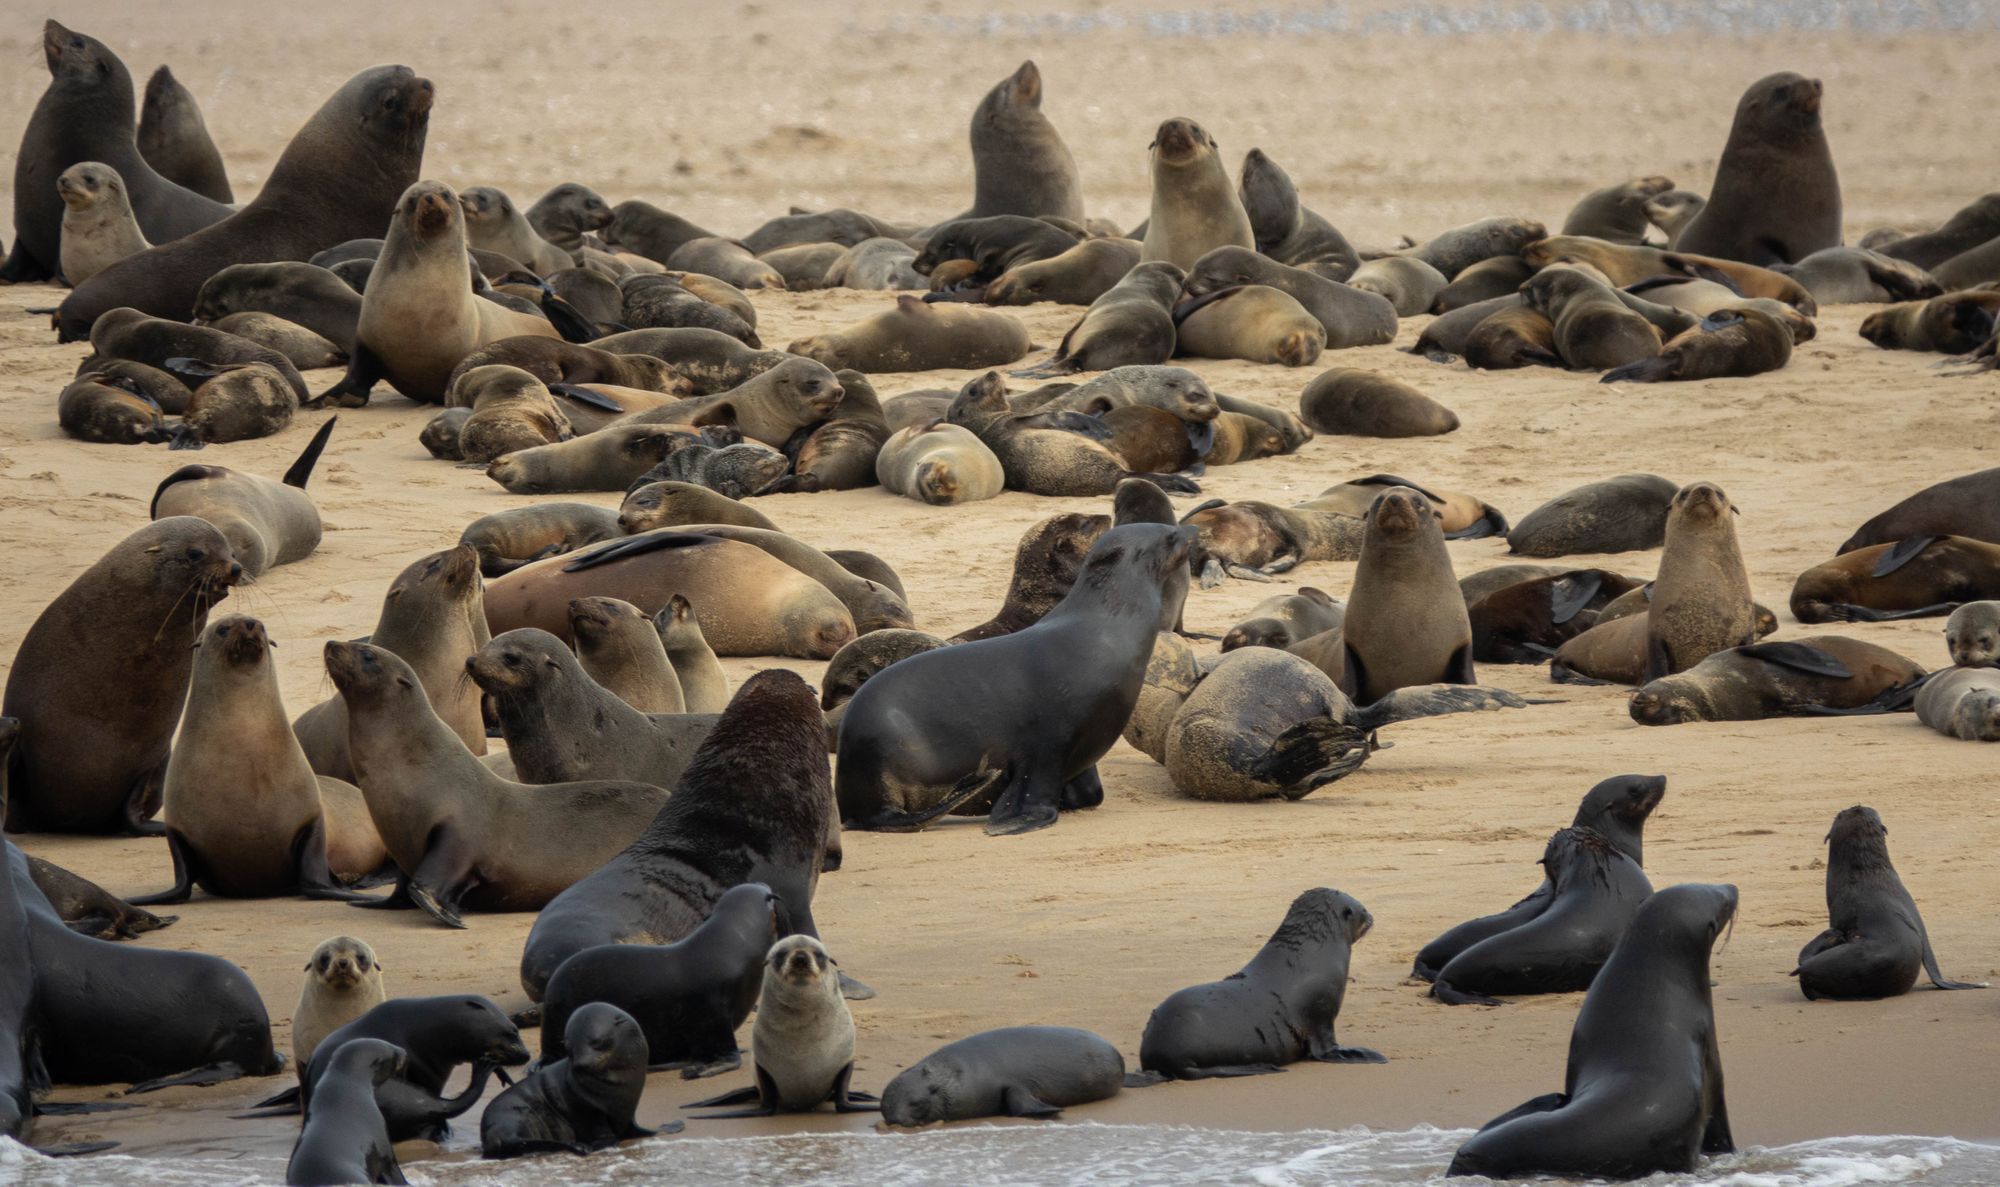 Cape Fur Seals on the sand.